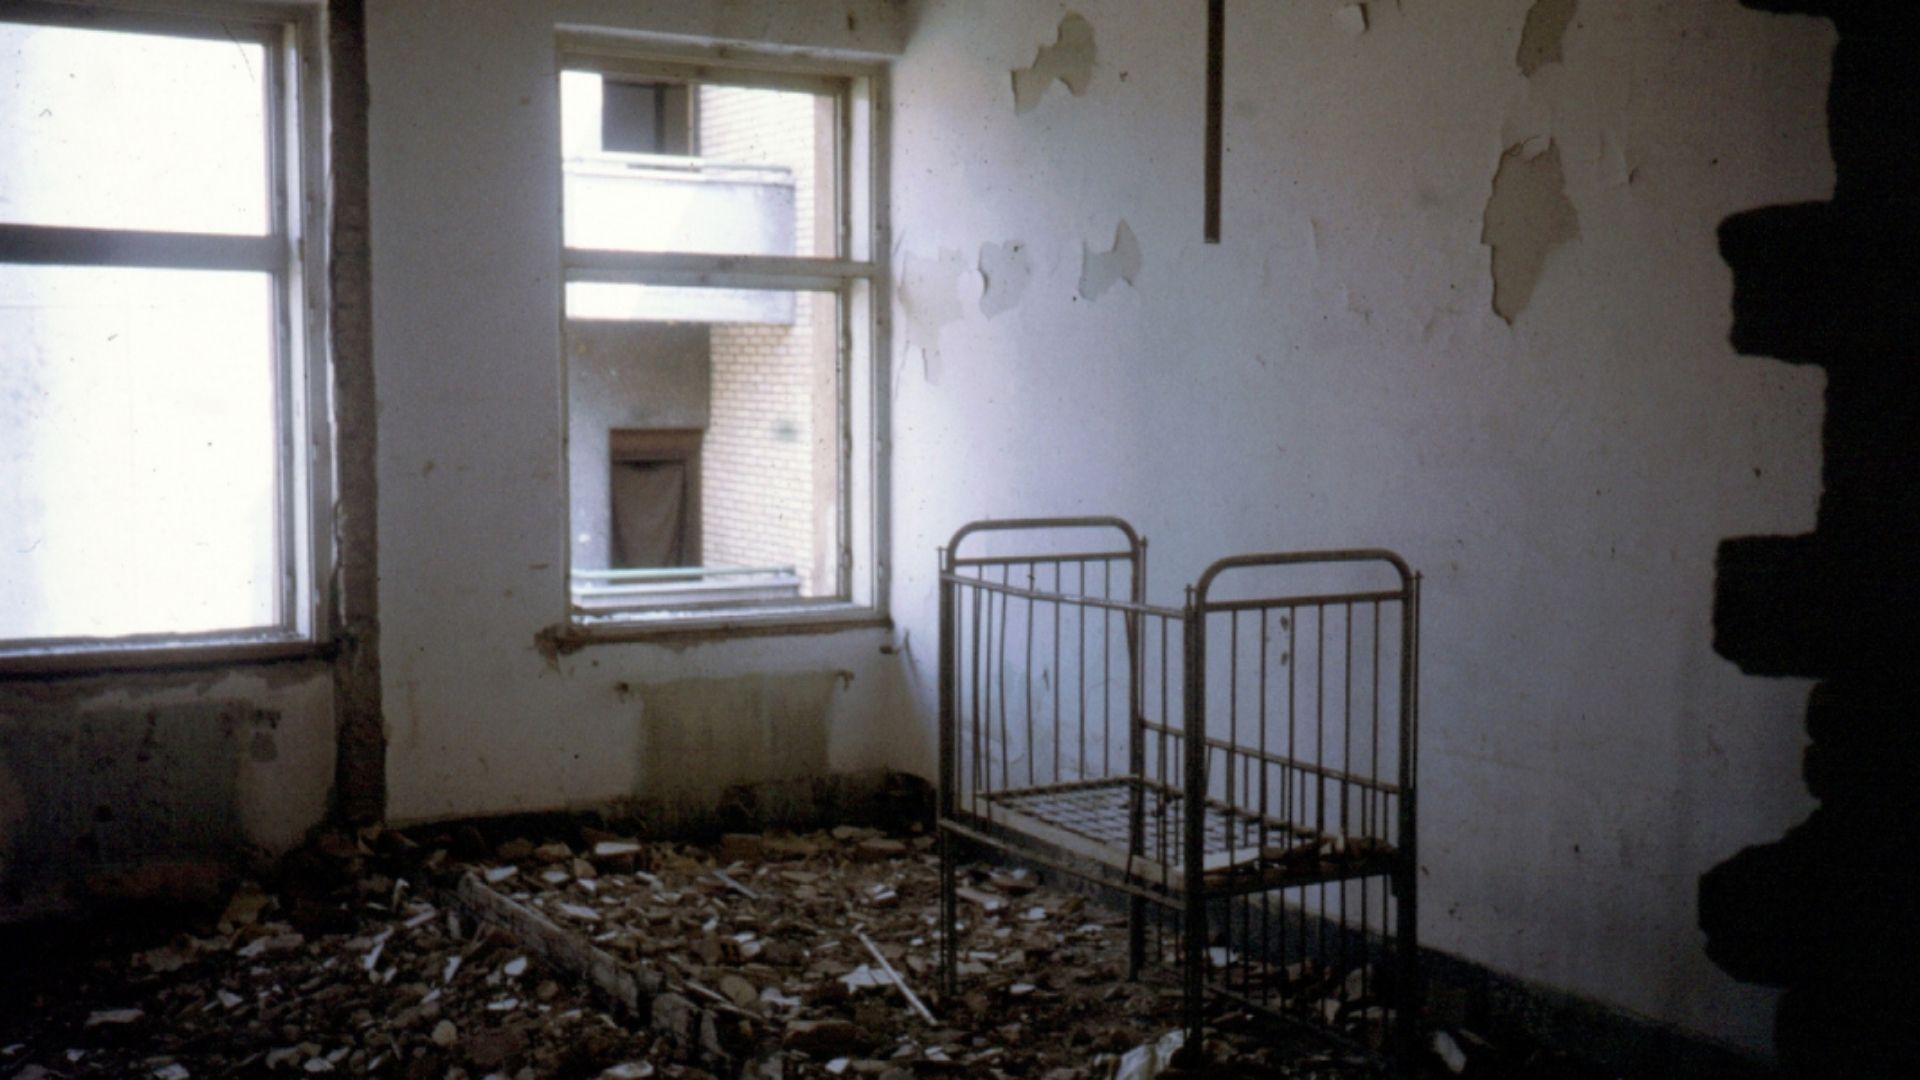 An orphanage in the aftermath of the Balkans war